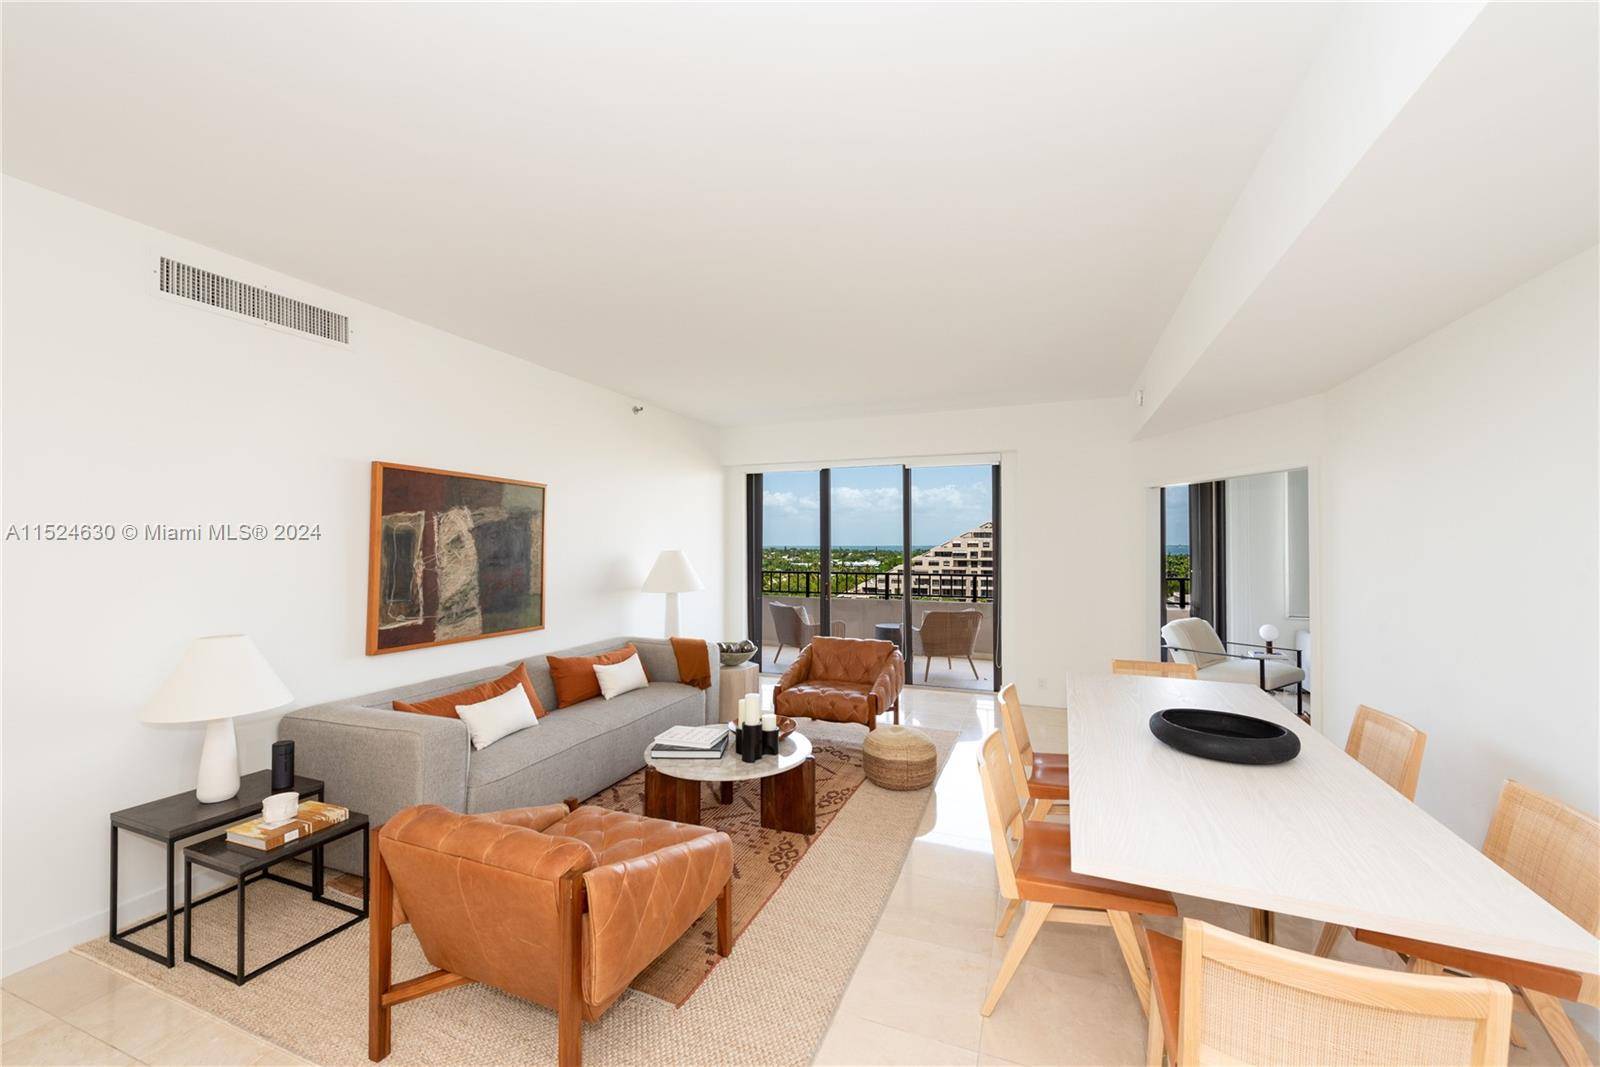 This apartment is located in Key Colony Tidemark and has been completely renovated, presenting an ideal move in opportunity.